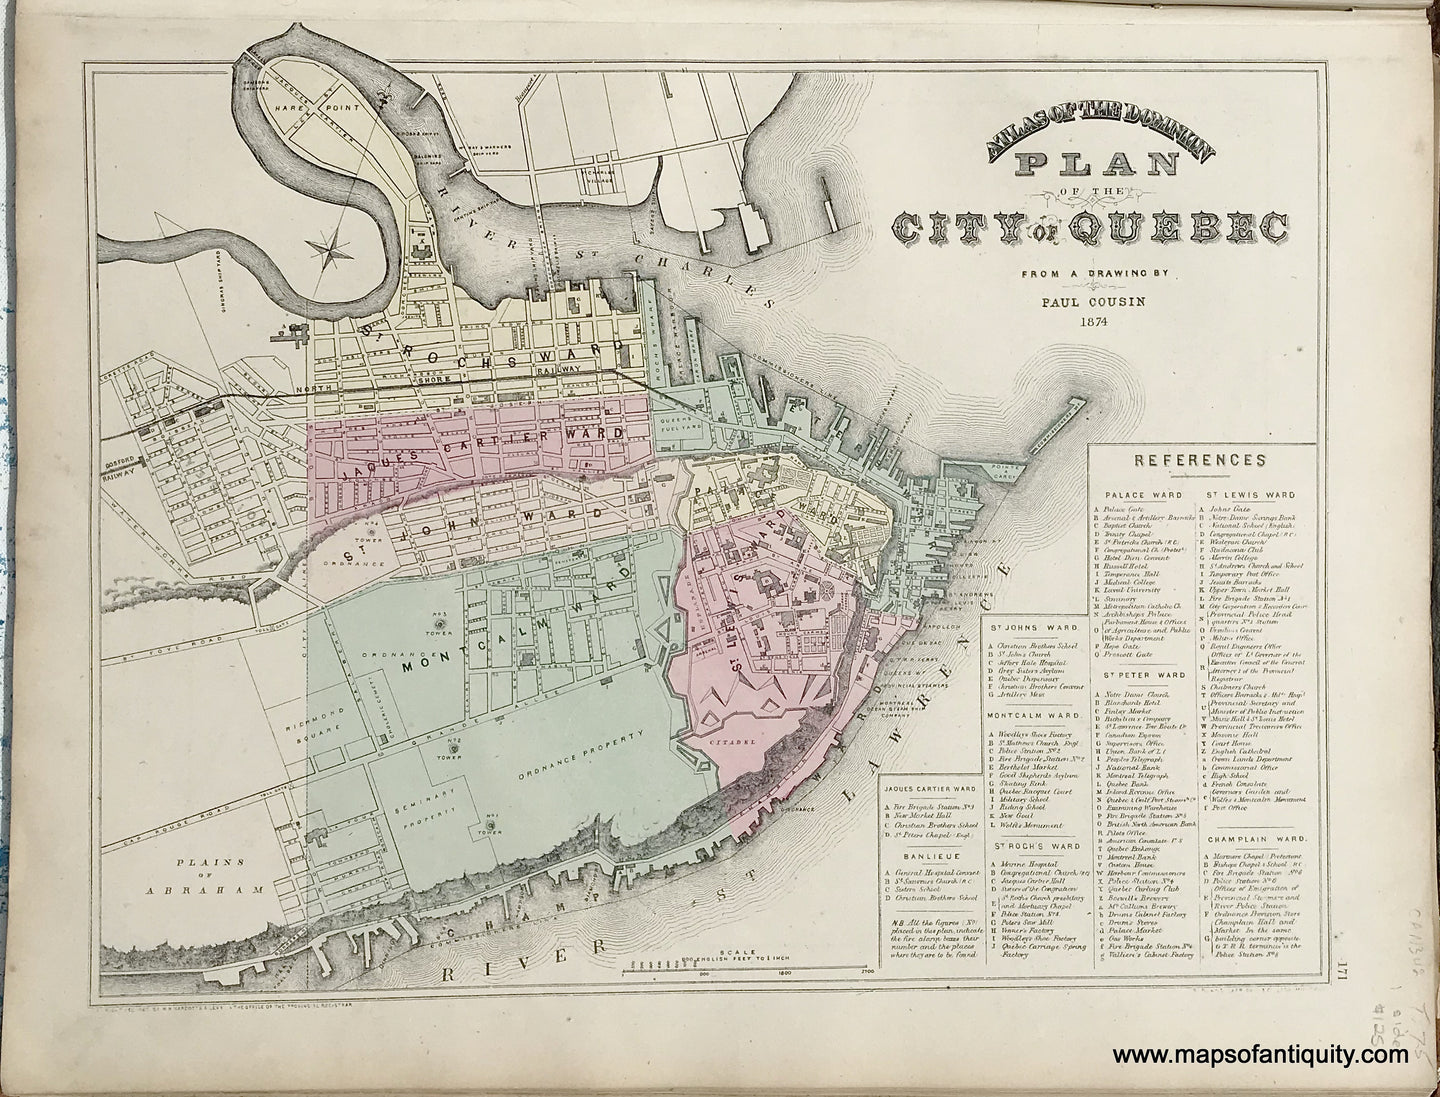 Antique-Map-Sheet-with-three-maps:-Plan-of-the-City-of-Quebec-from-a-drawing-by-Paul-Cousin-/-County-of-Gaspe-and-parts-of-Bonaventure-and-Rimouski-/-Counties-of-Charlevoix-and-Kamouraska-1875-Walling-/-Tackabury-Canada-Civil-War-1800s-19th-century-Maps-of-Antiquity